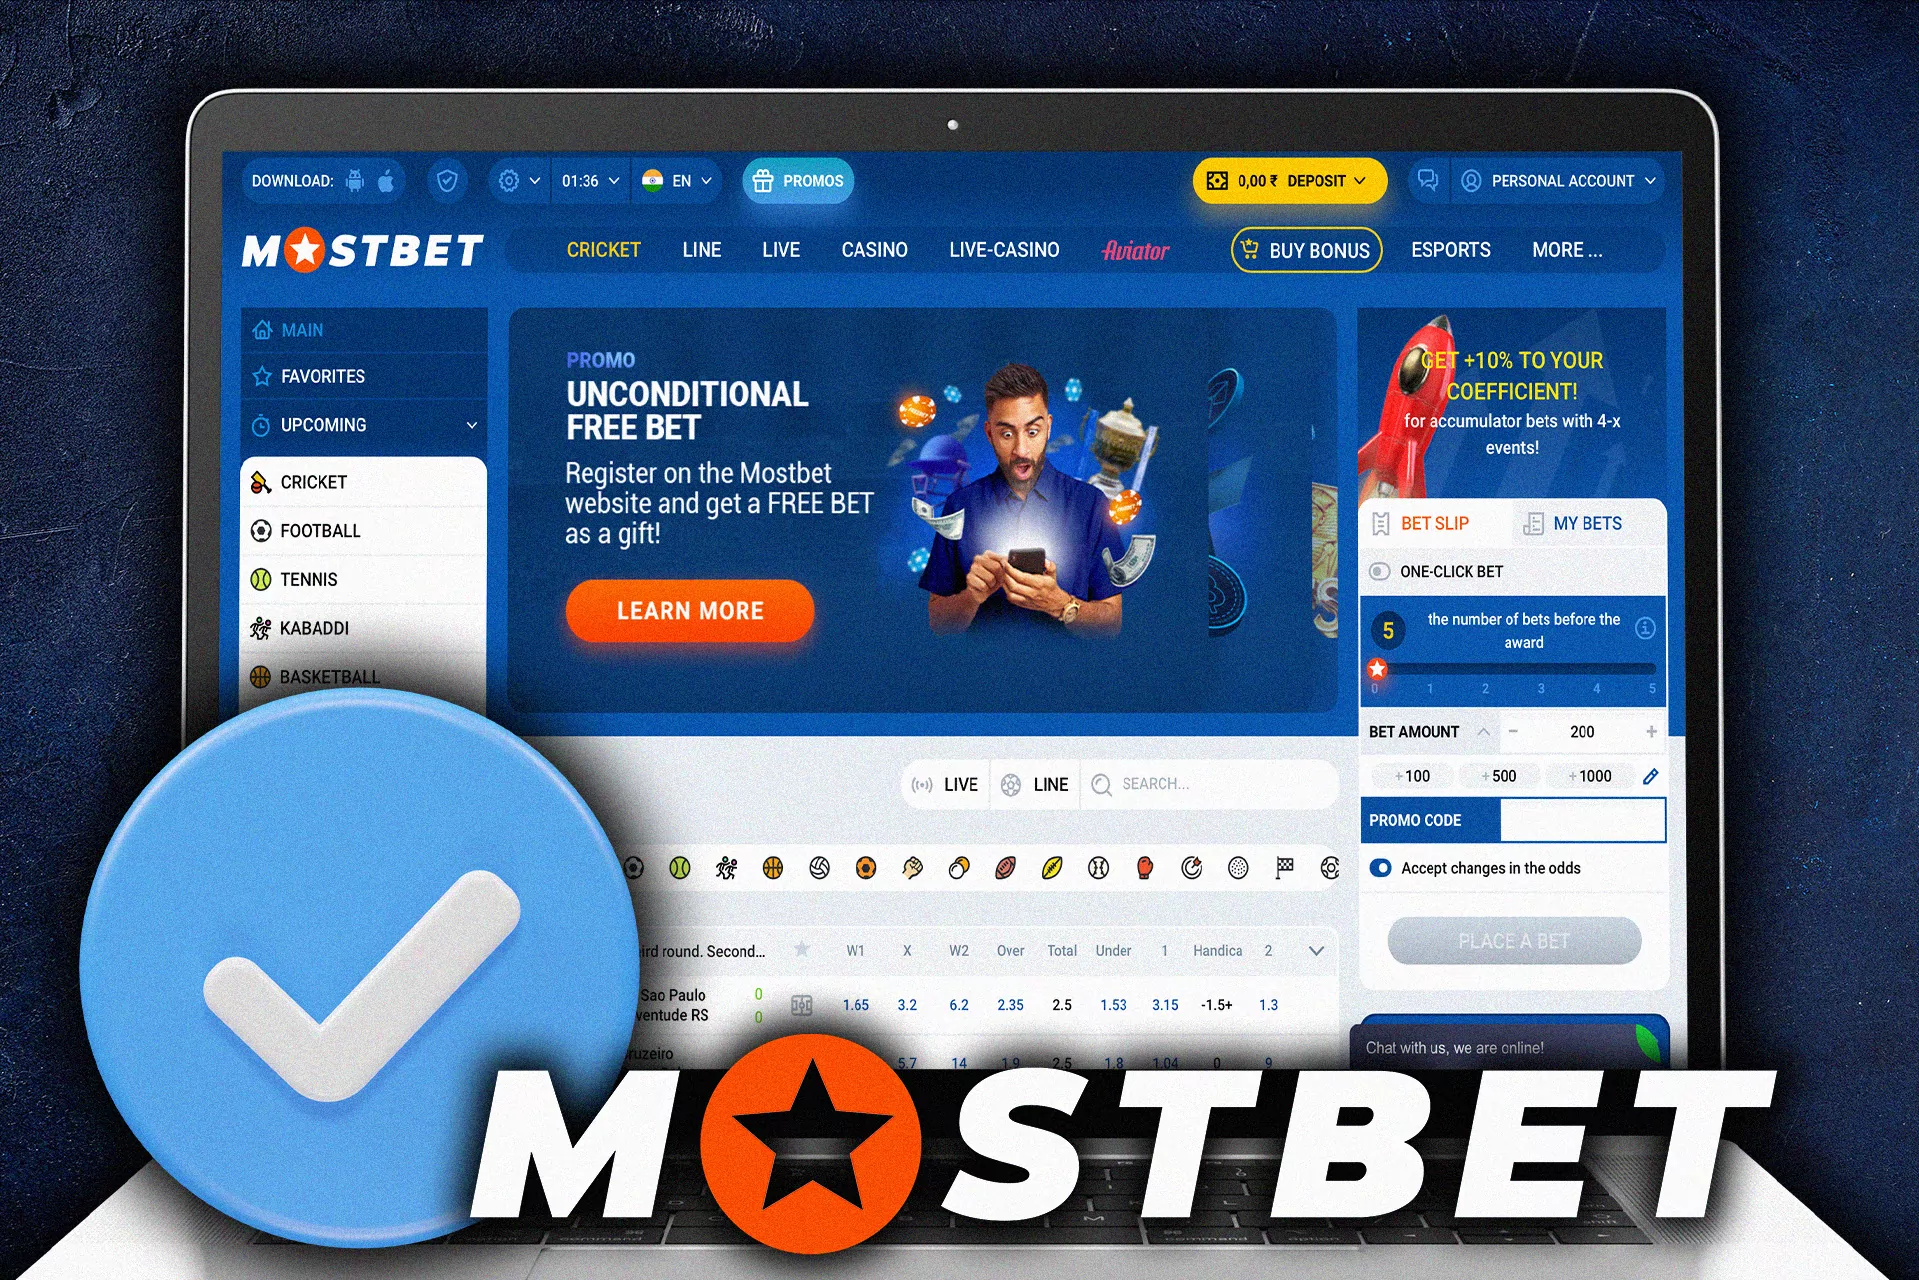 Mostbet com bookmaker office operates legally in India under international license № 8048/JAZ2016-065.